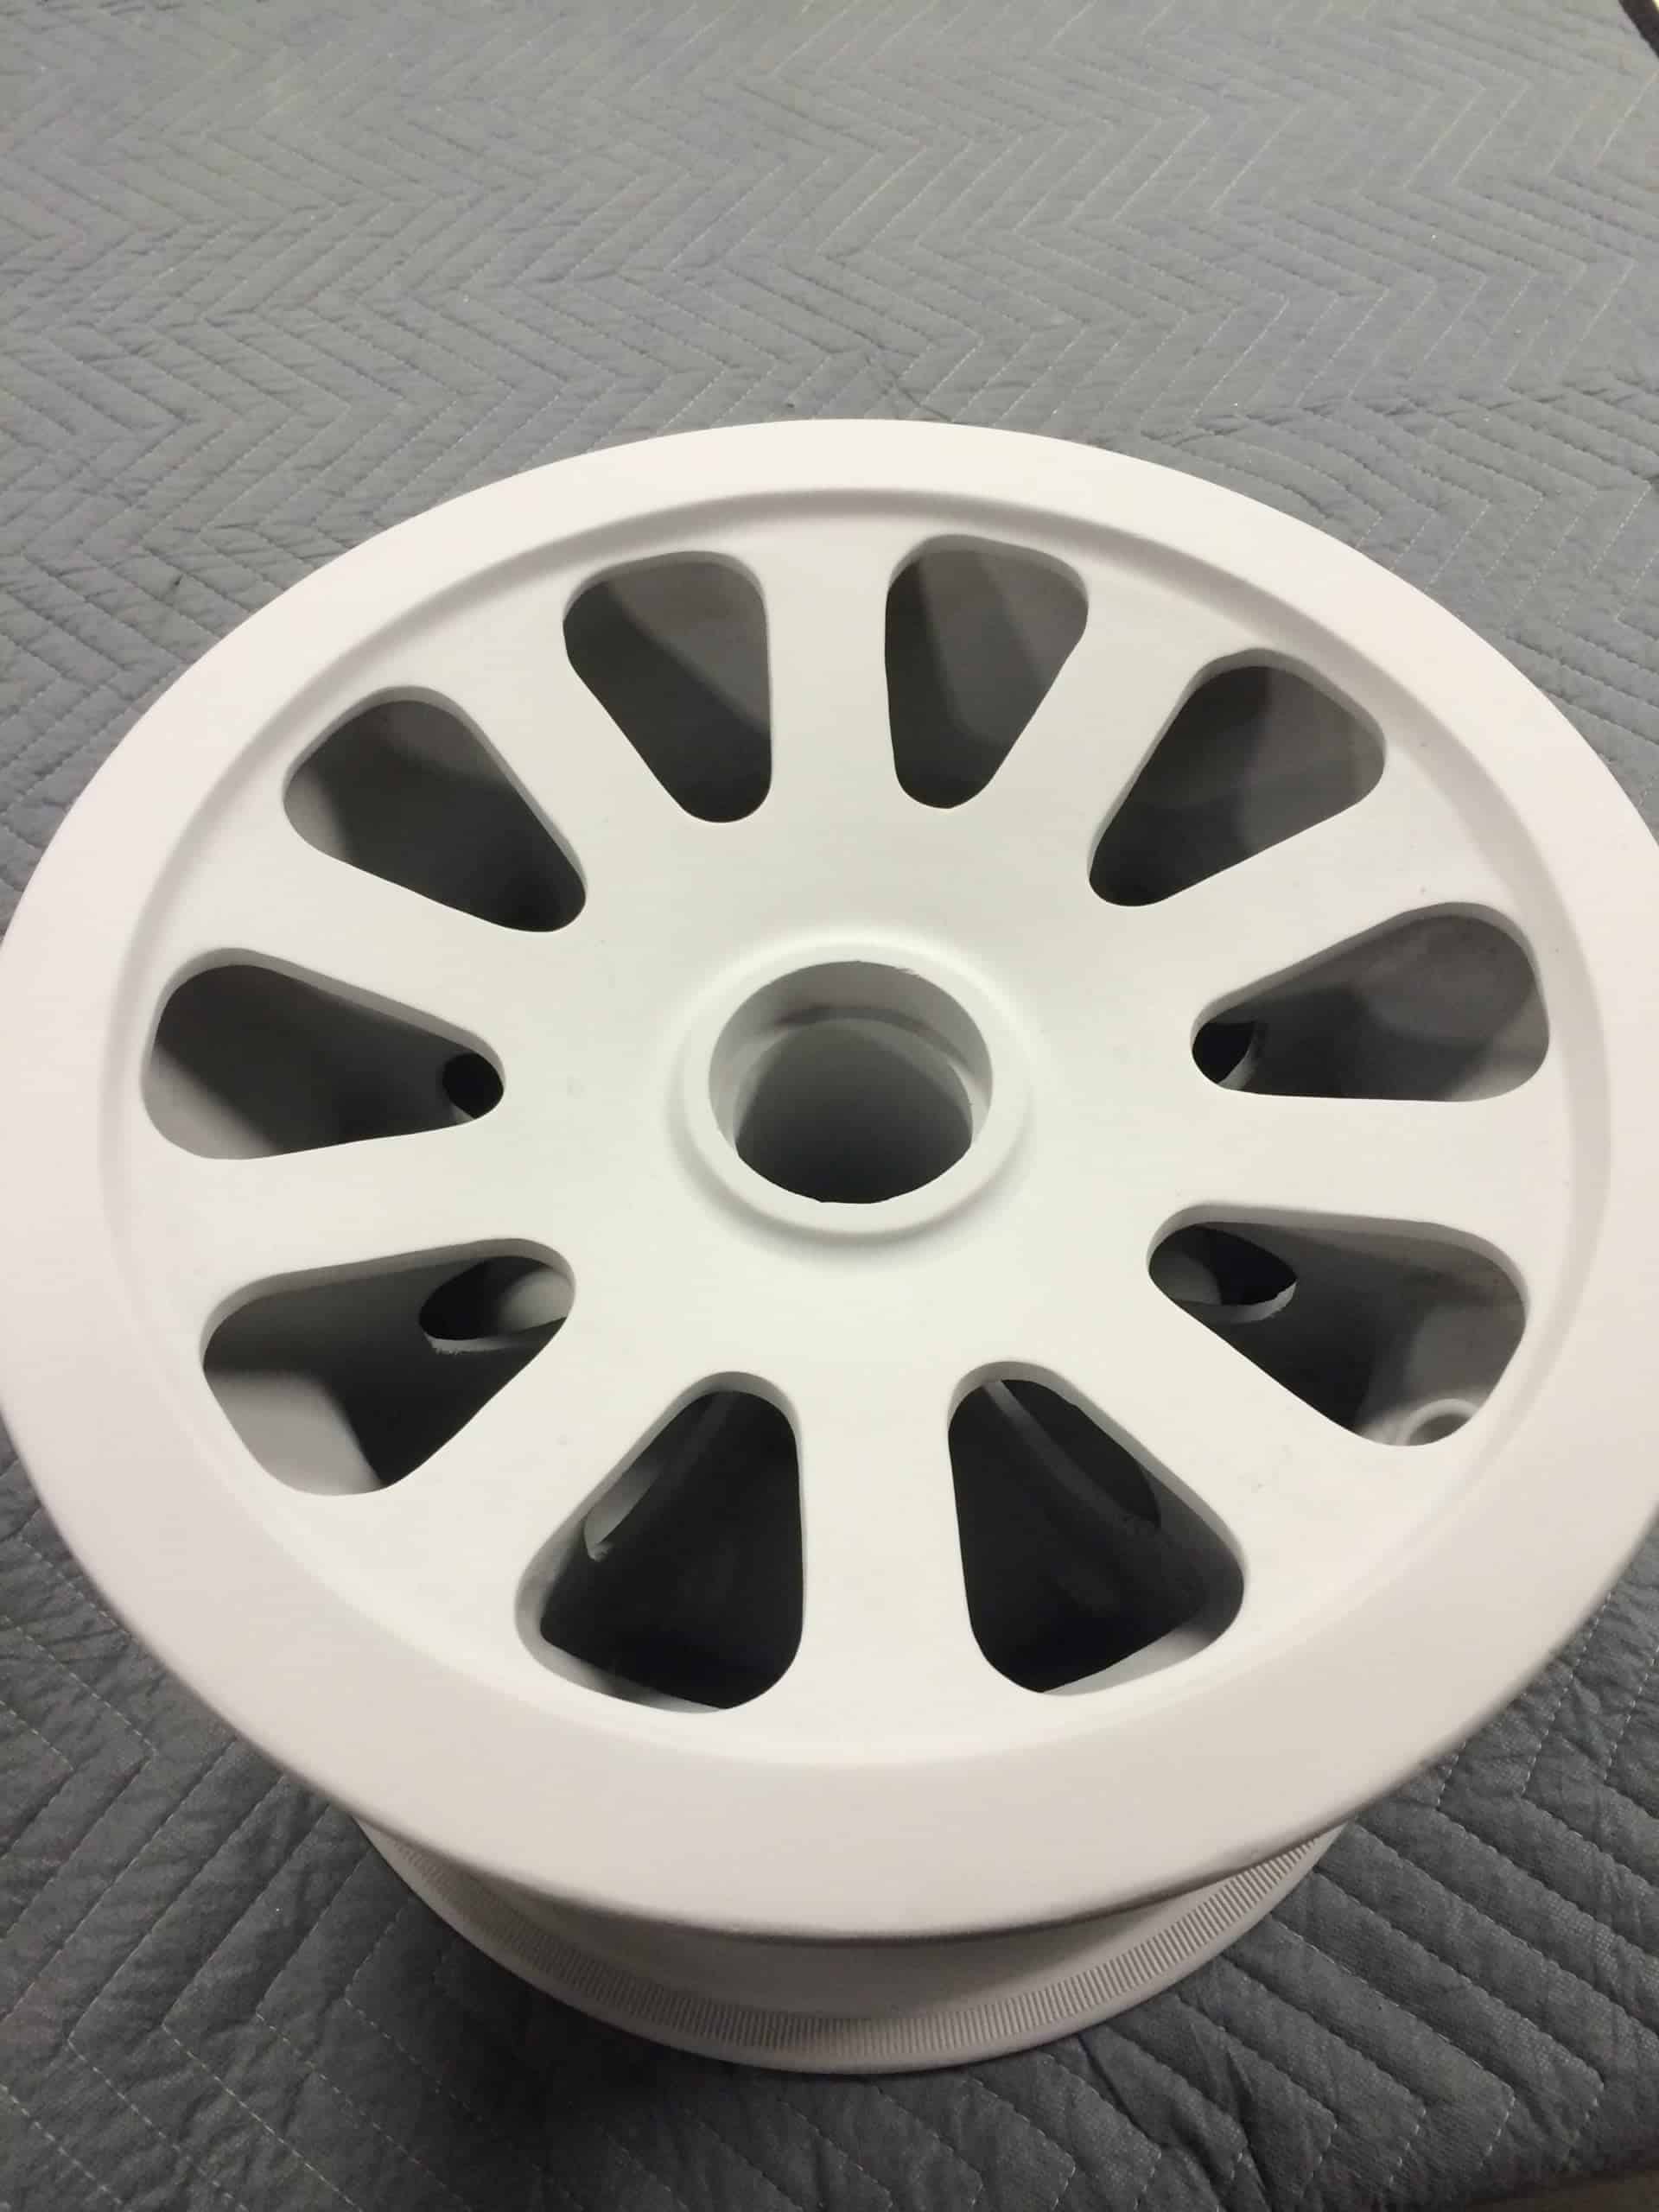 An overhauled wheel after Tagnite coating has been applied and ready for paint.